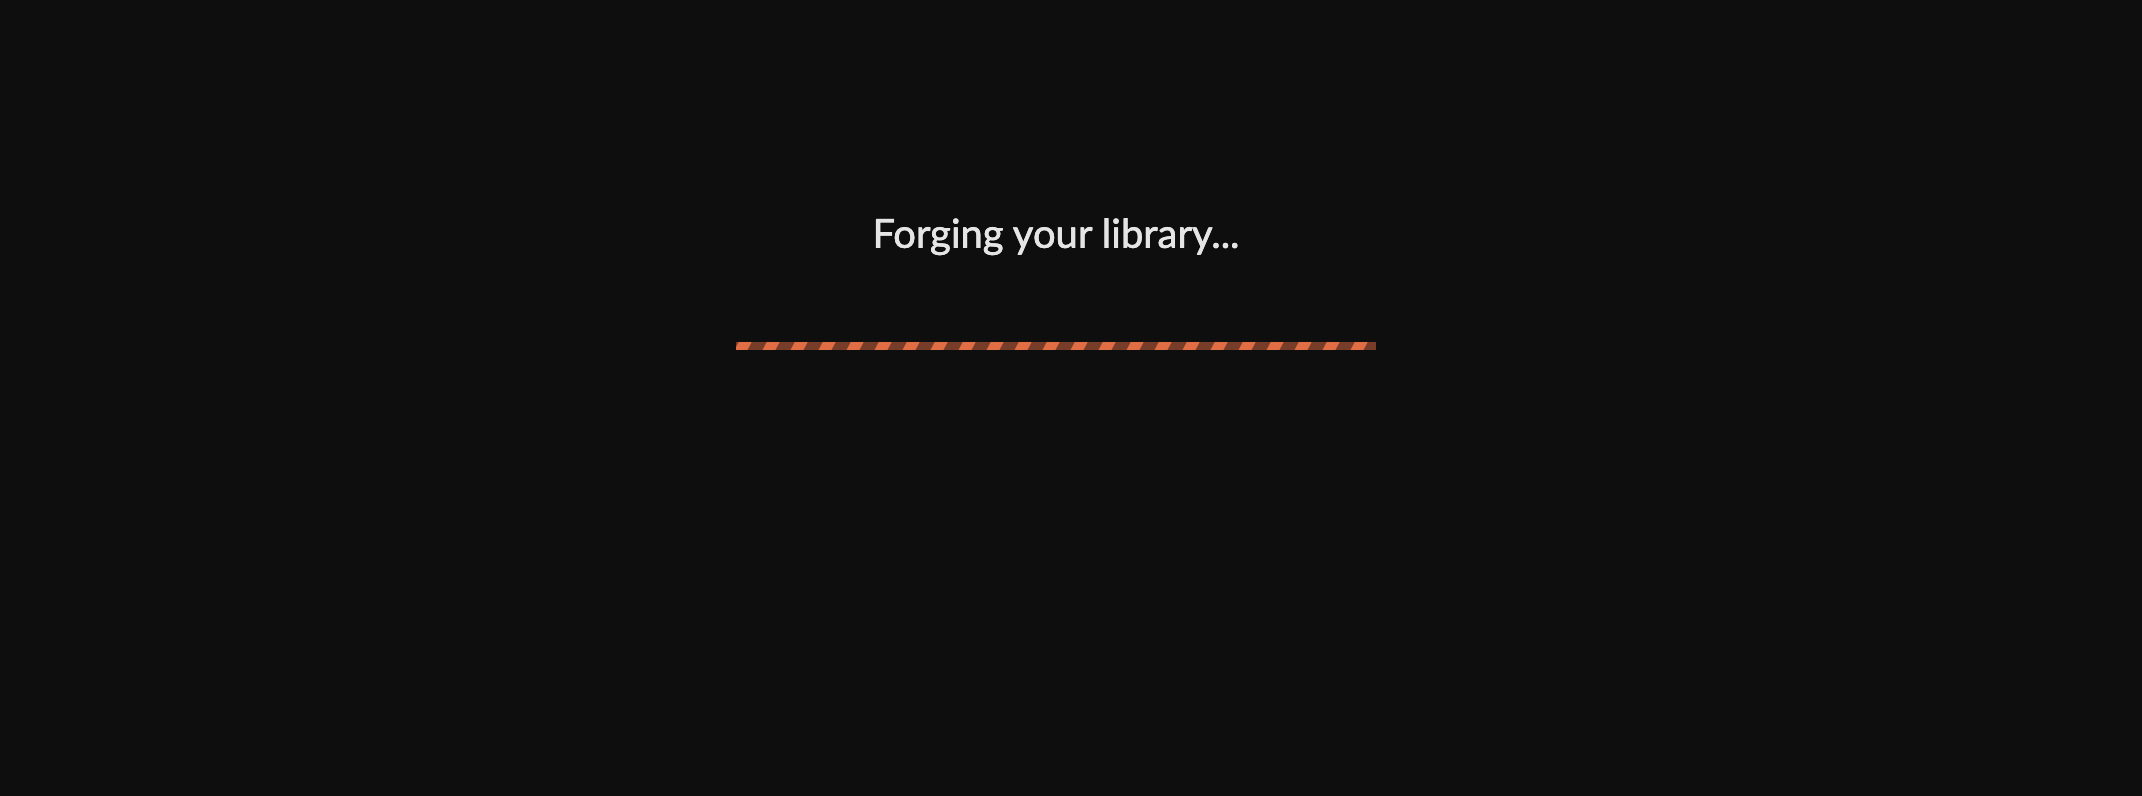 forging your library